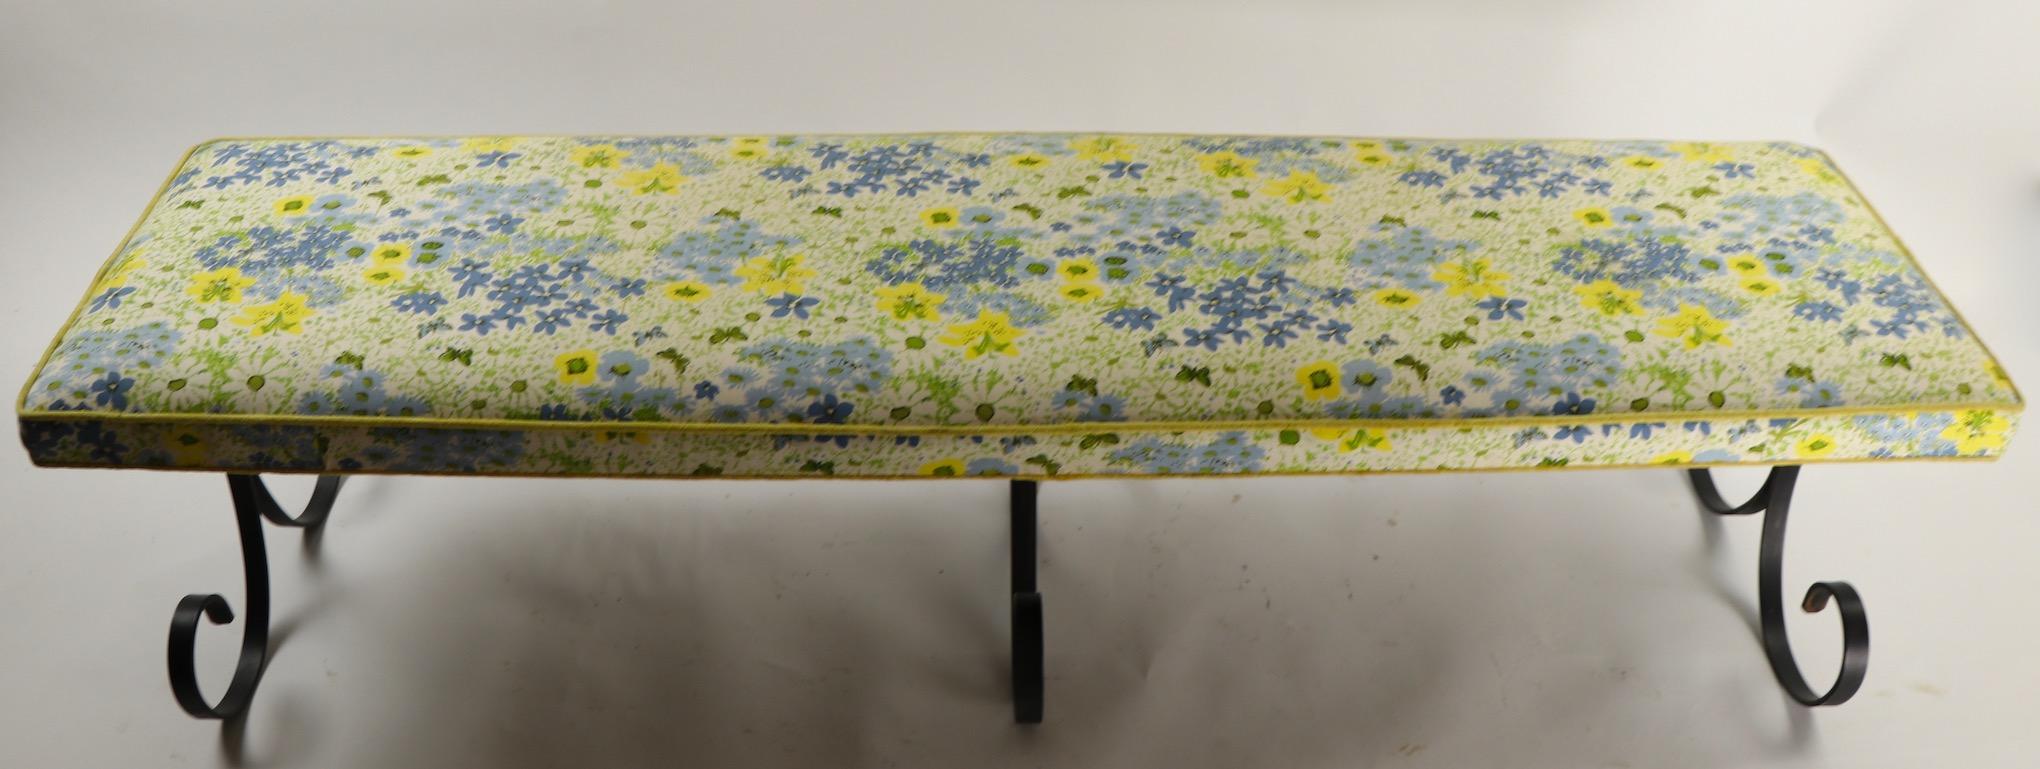 Stylish and fun bench with wrought iron curlicue legs and colorful floral pattern upholstered seat. Unusually long (67 inches) provides ample seating room. Original, clean ready to use condition.